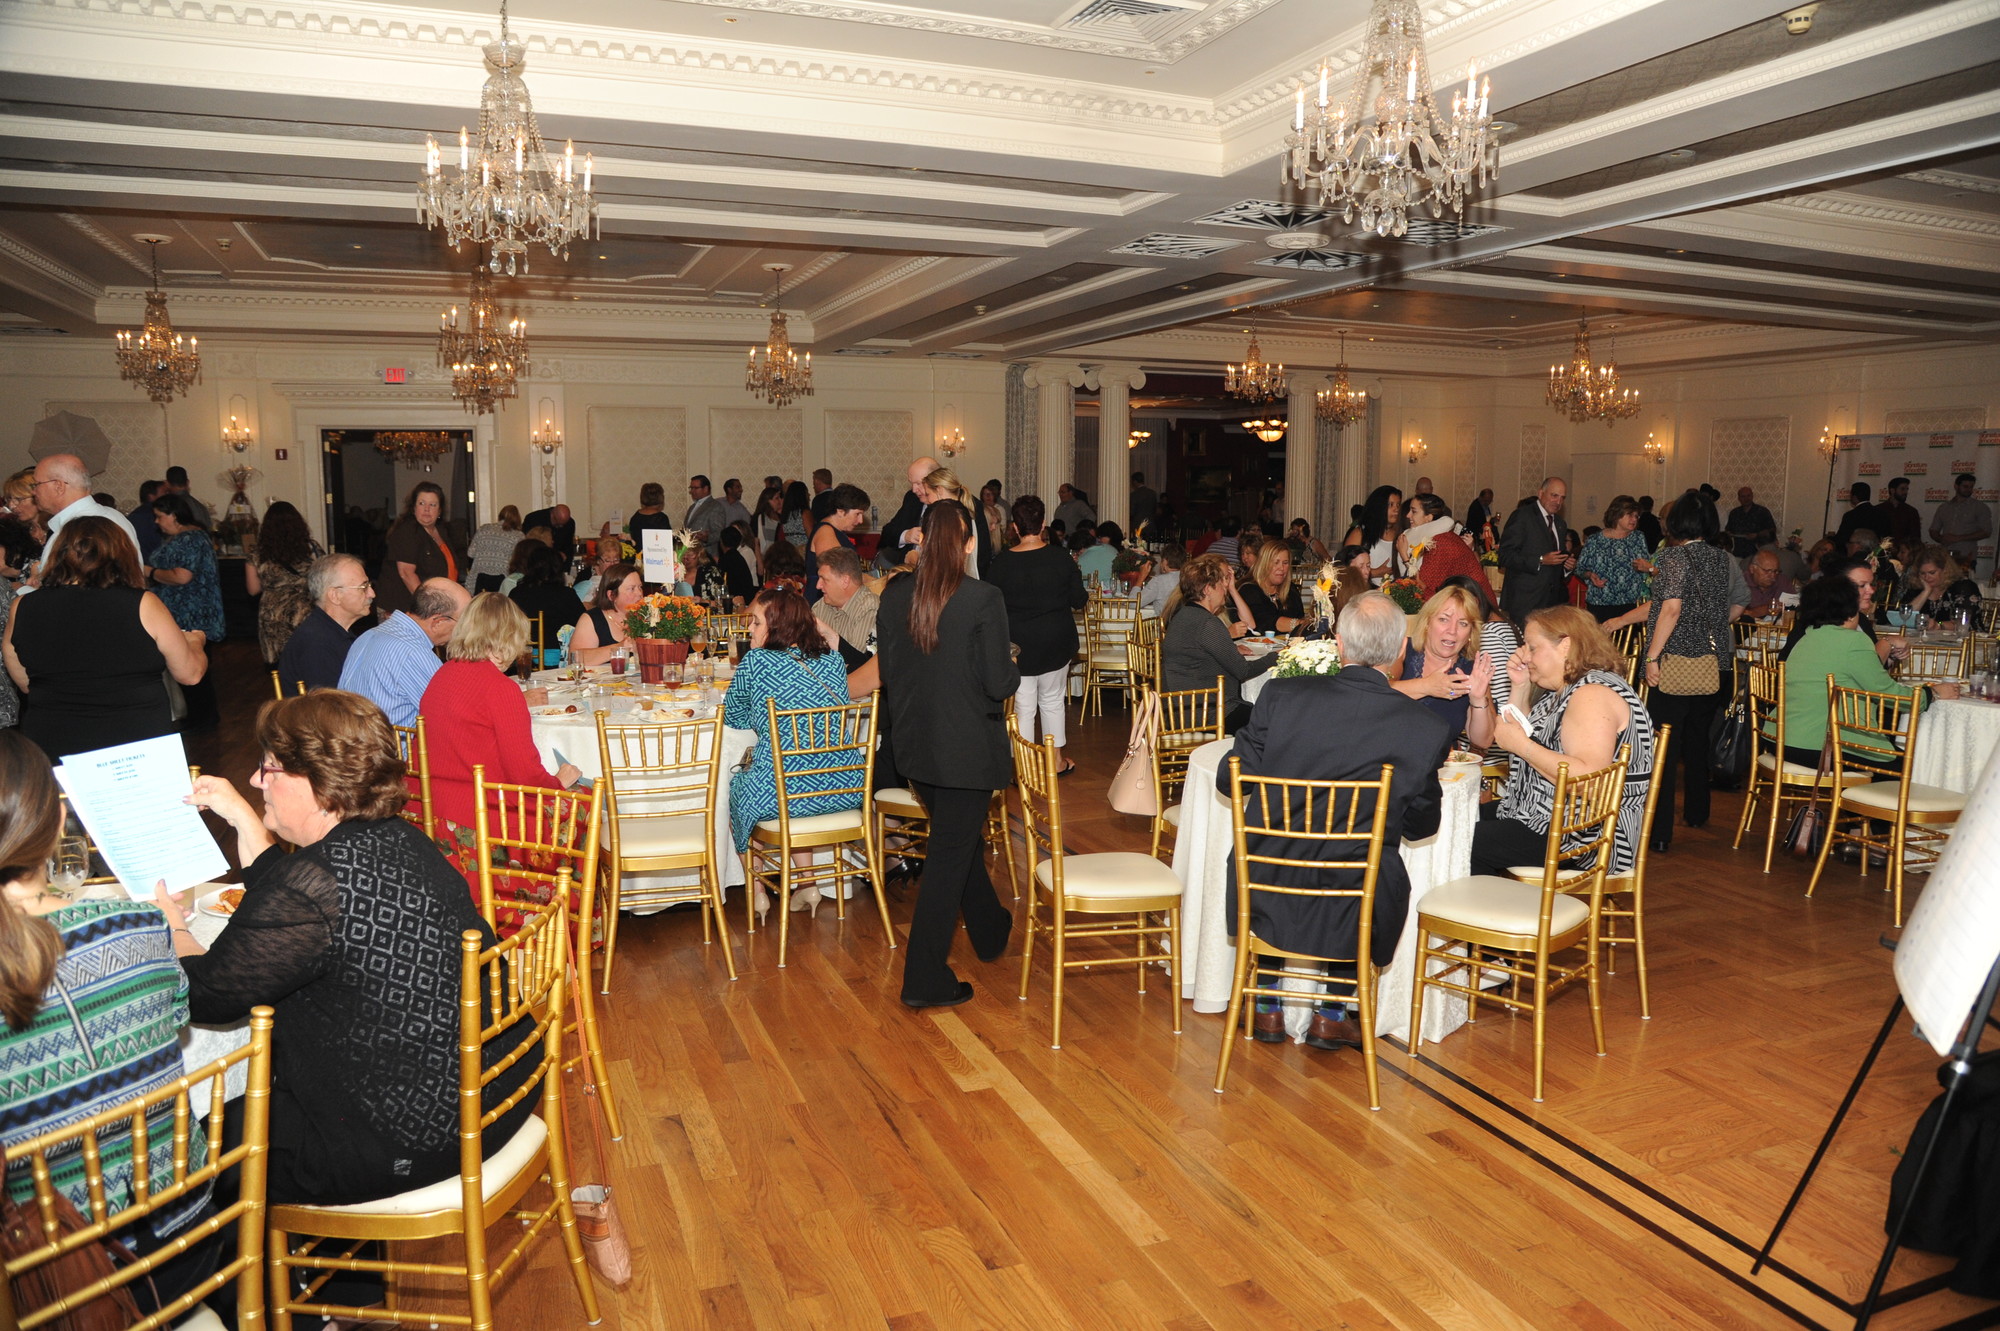 Hundreds attended the food tasting fundraiser at the Carltun on the Park on Monday night.